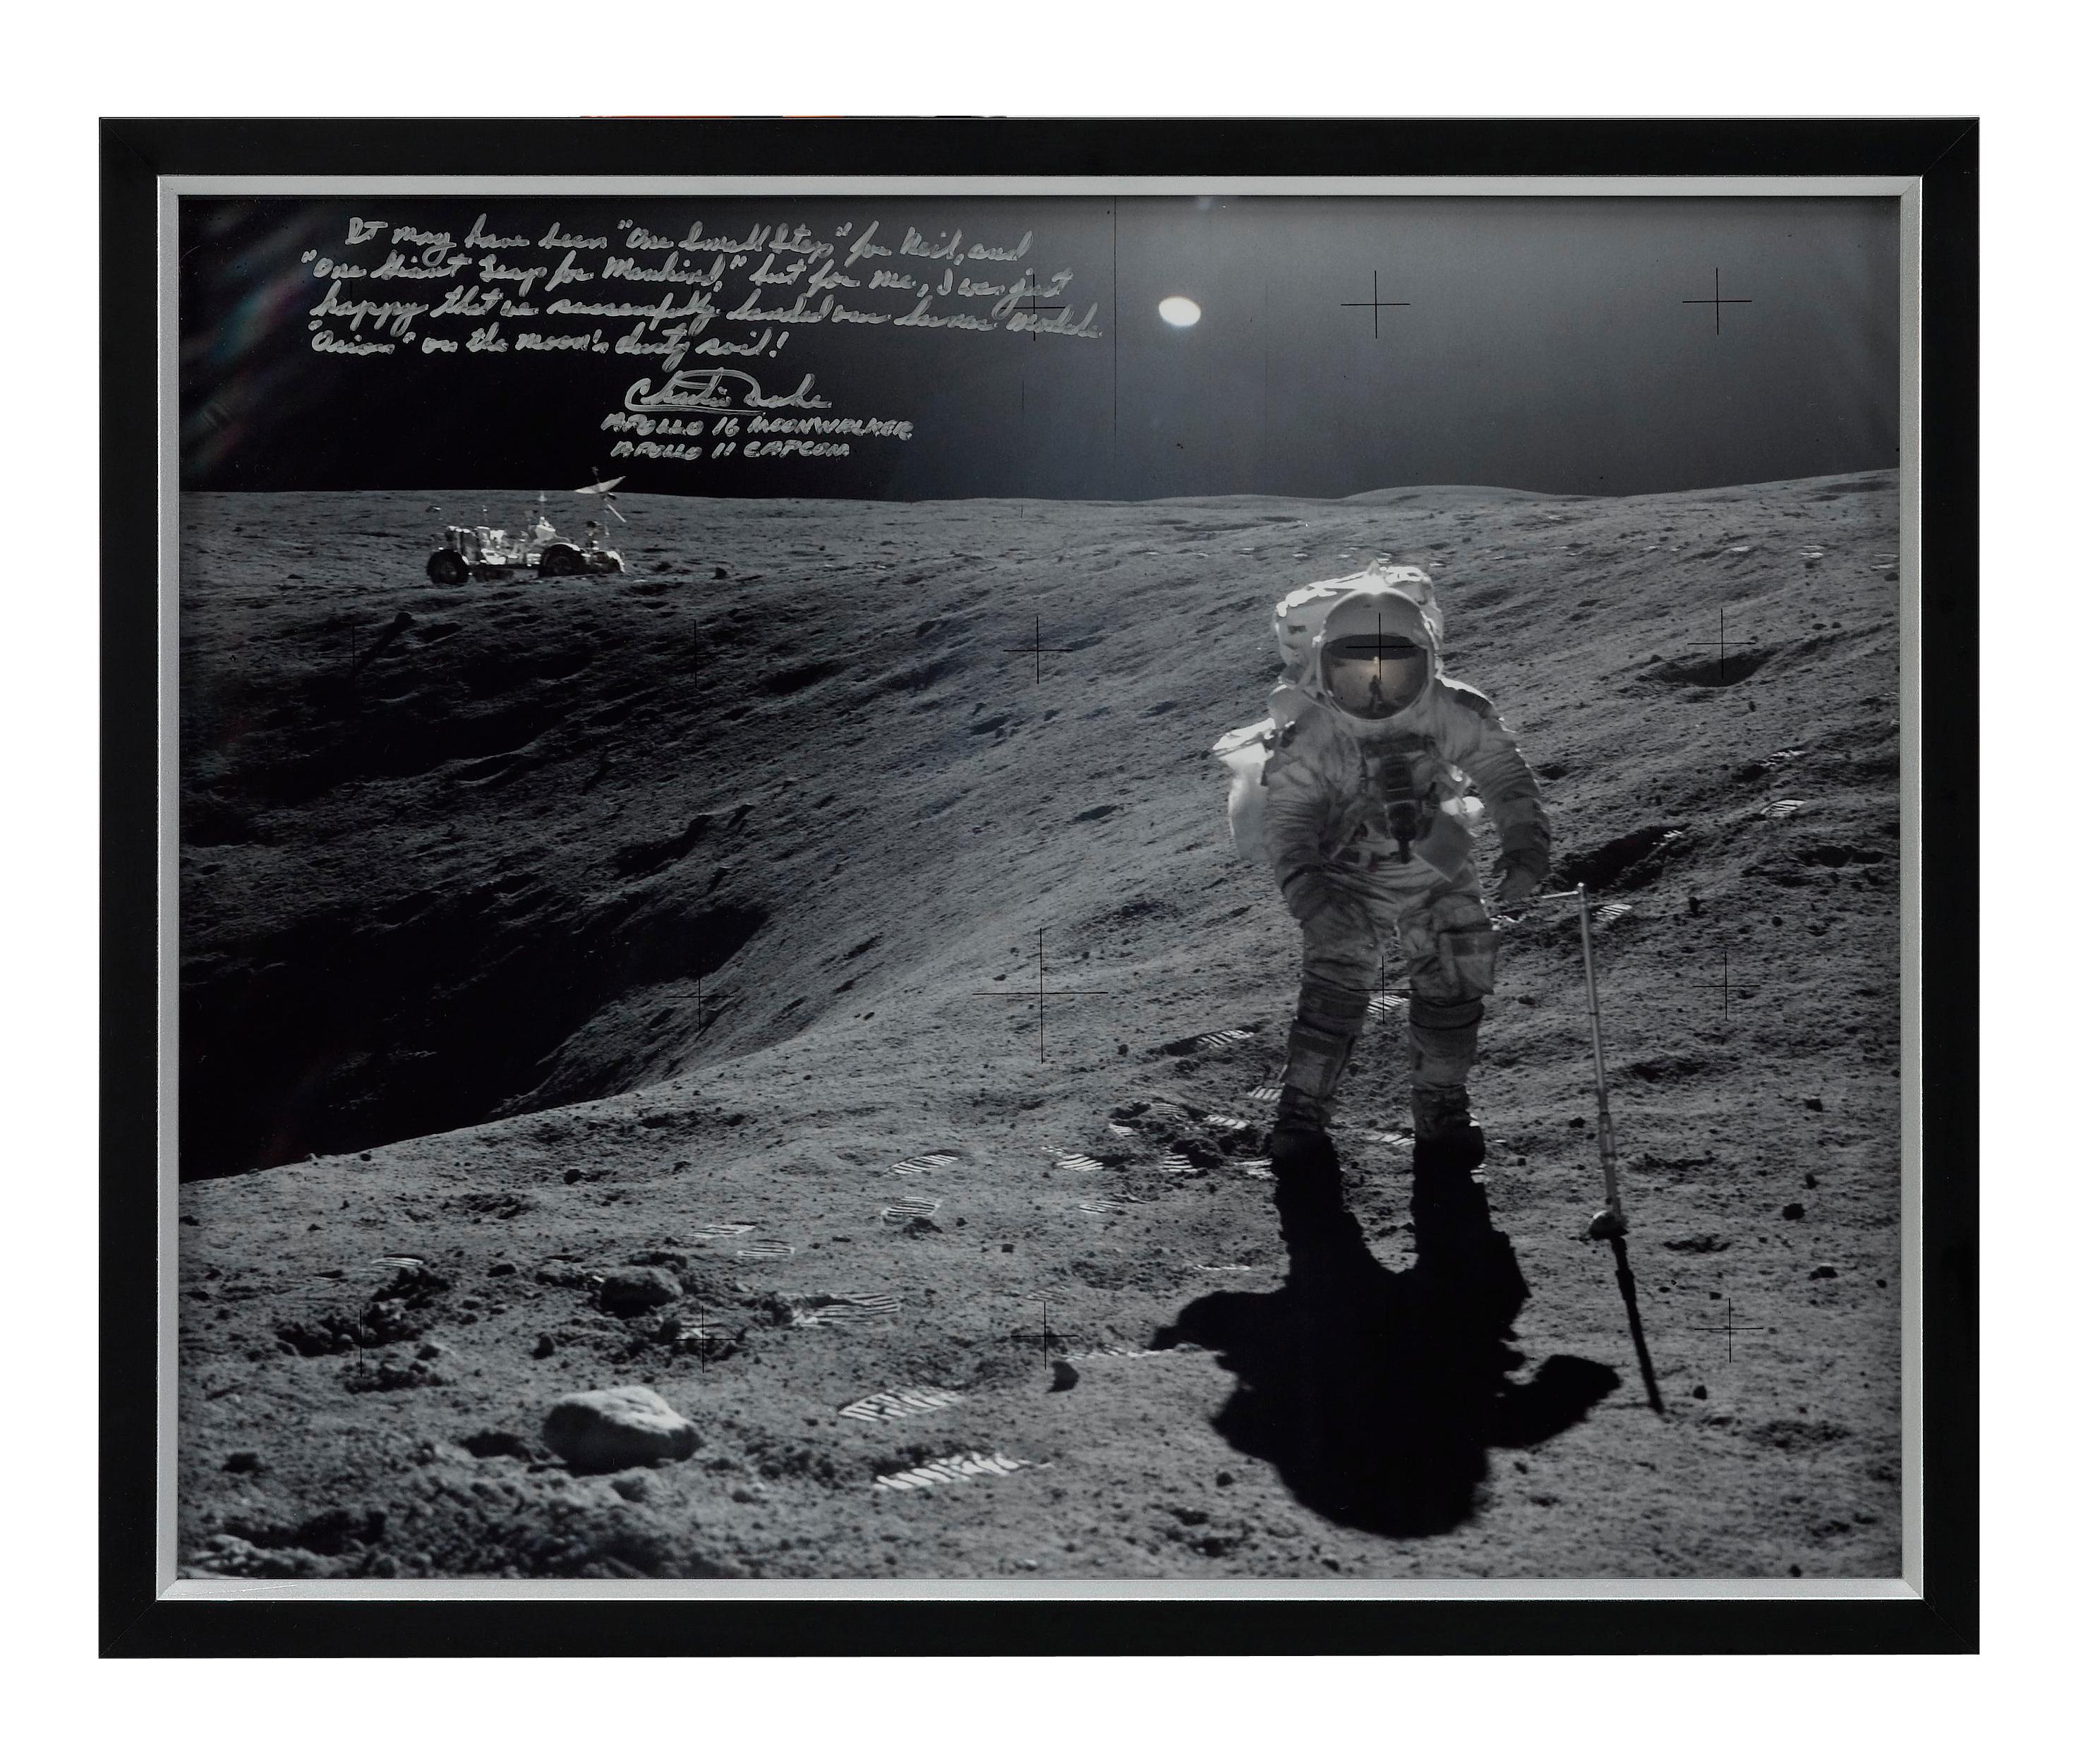 Presented is an Apollo 16 mission photograph, signed and inscribed by Apollo 16 moonwalker Charlie Duke. The photograph shows Duke collecting lunar samples next to Plum Crater on the Moon. The photograph is inscribed in felt-tip gold ink and reads,